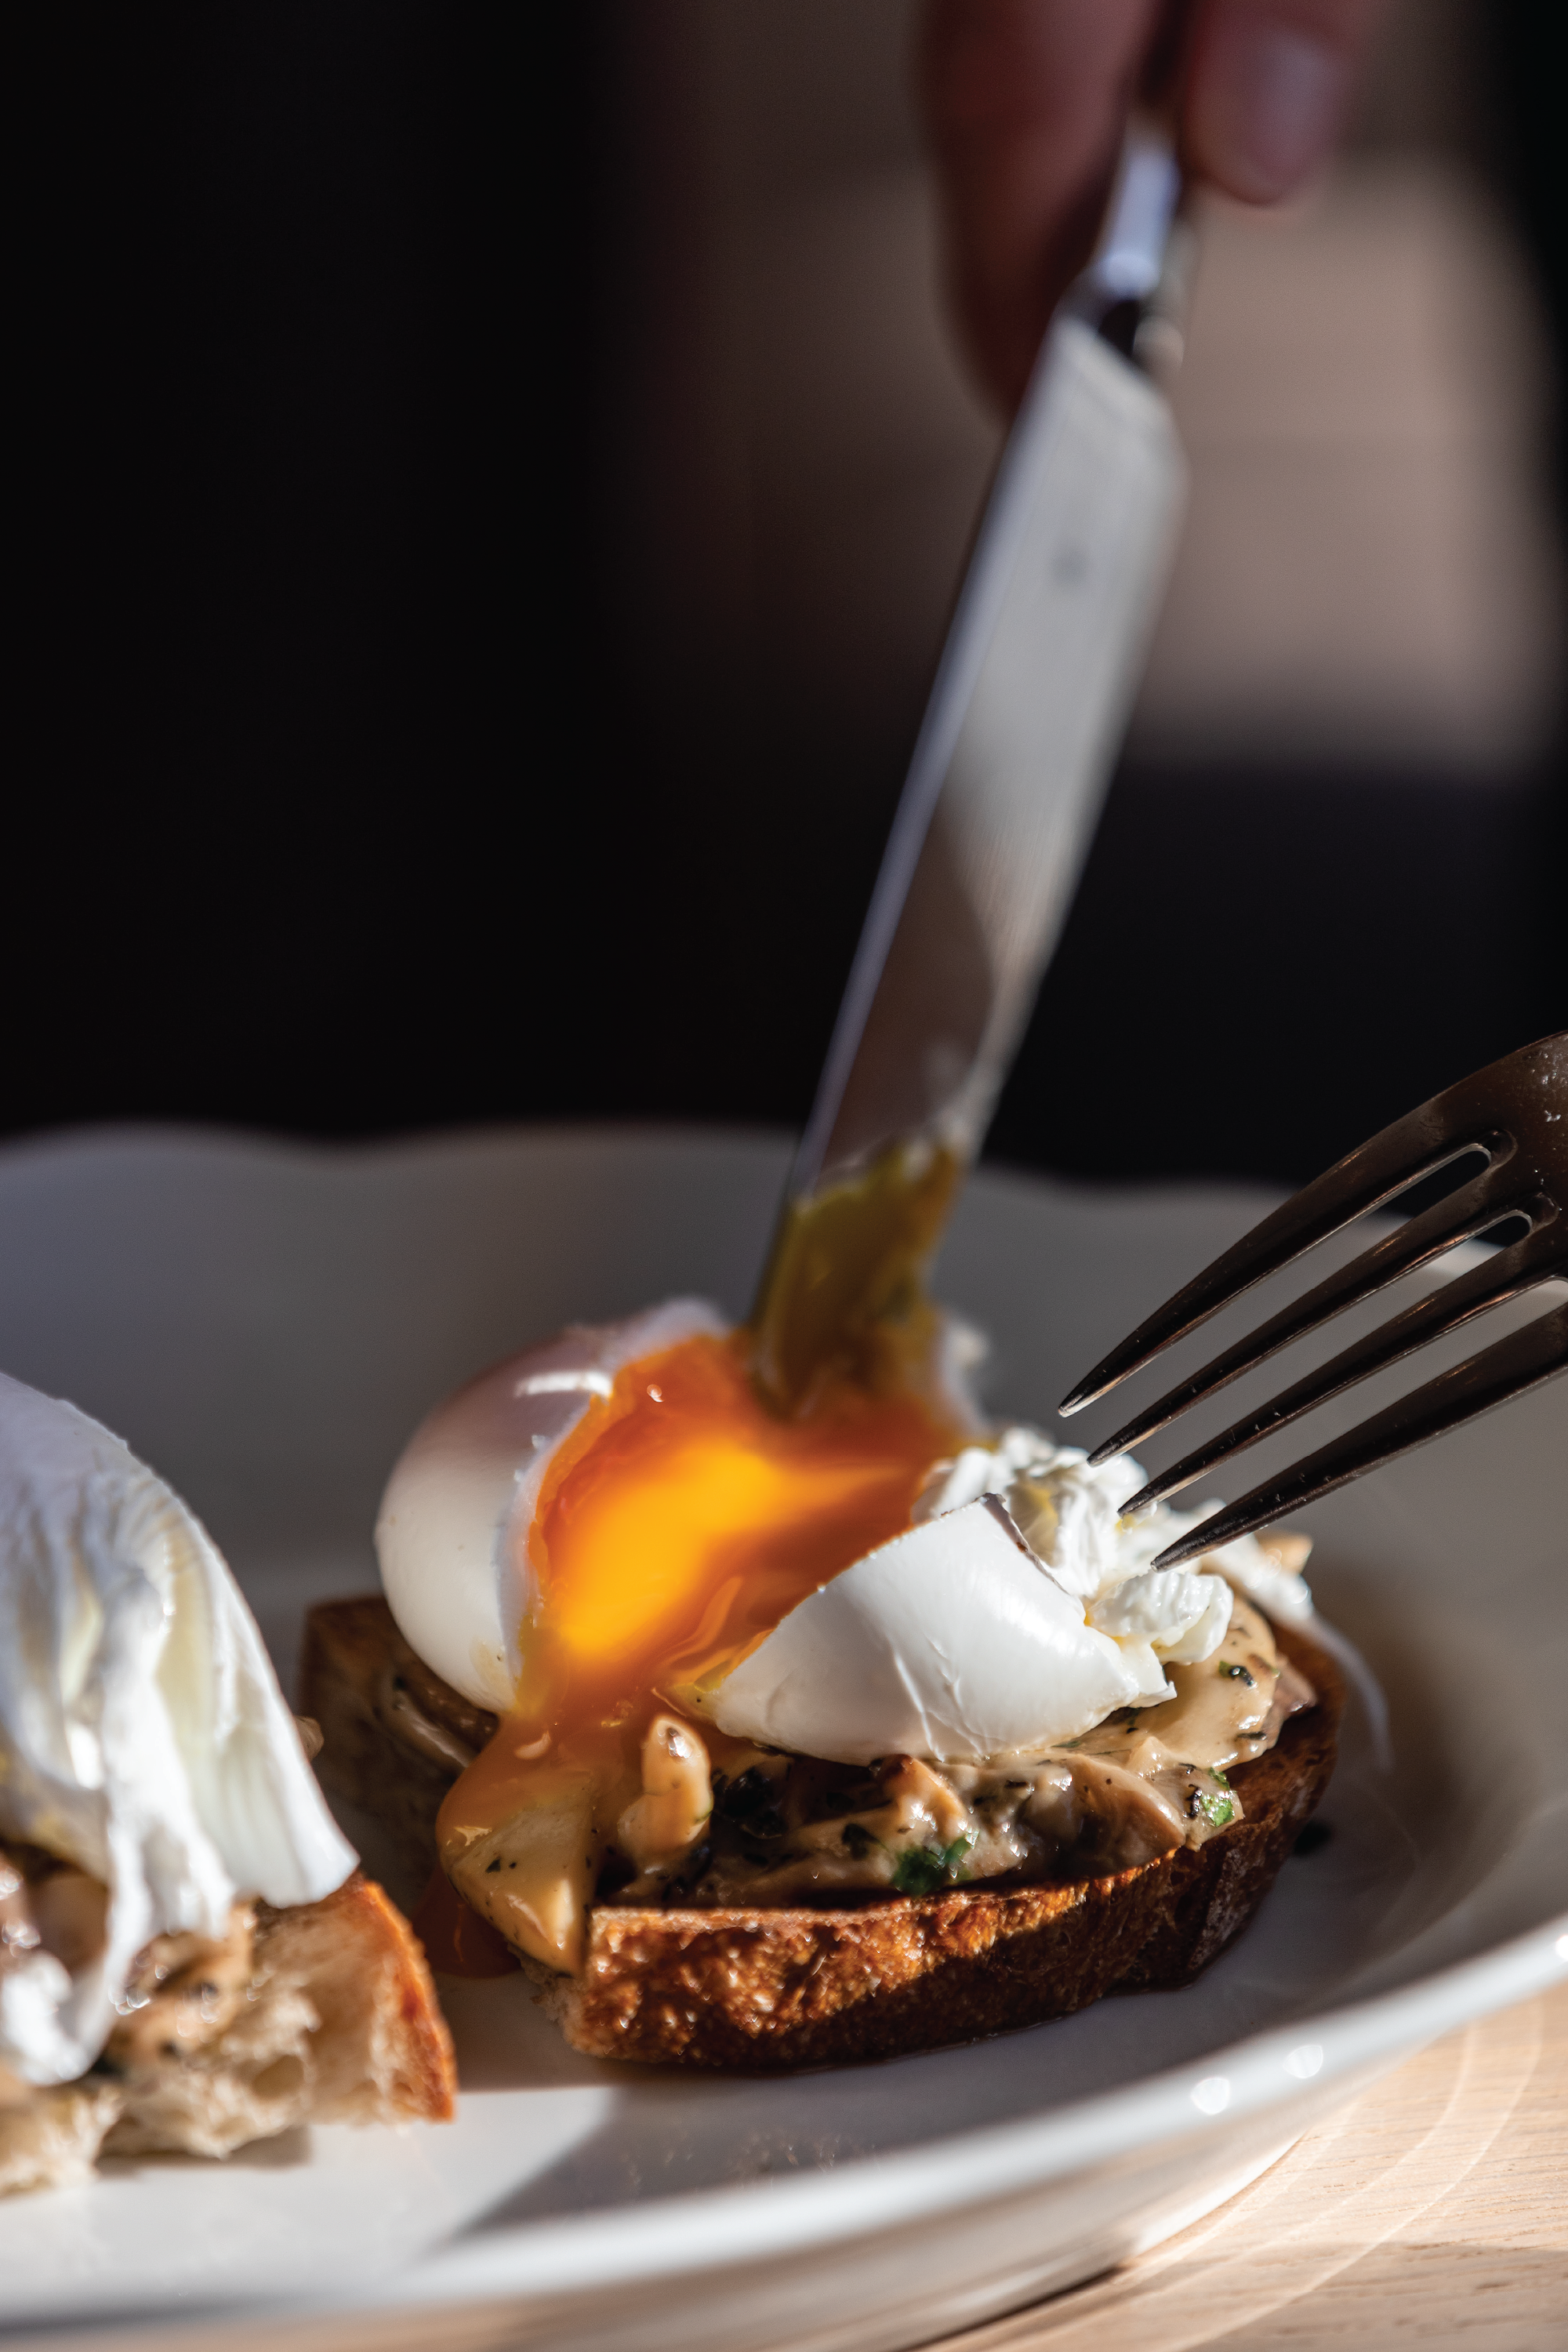 Mushroom Tartine with a poached egg